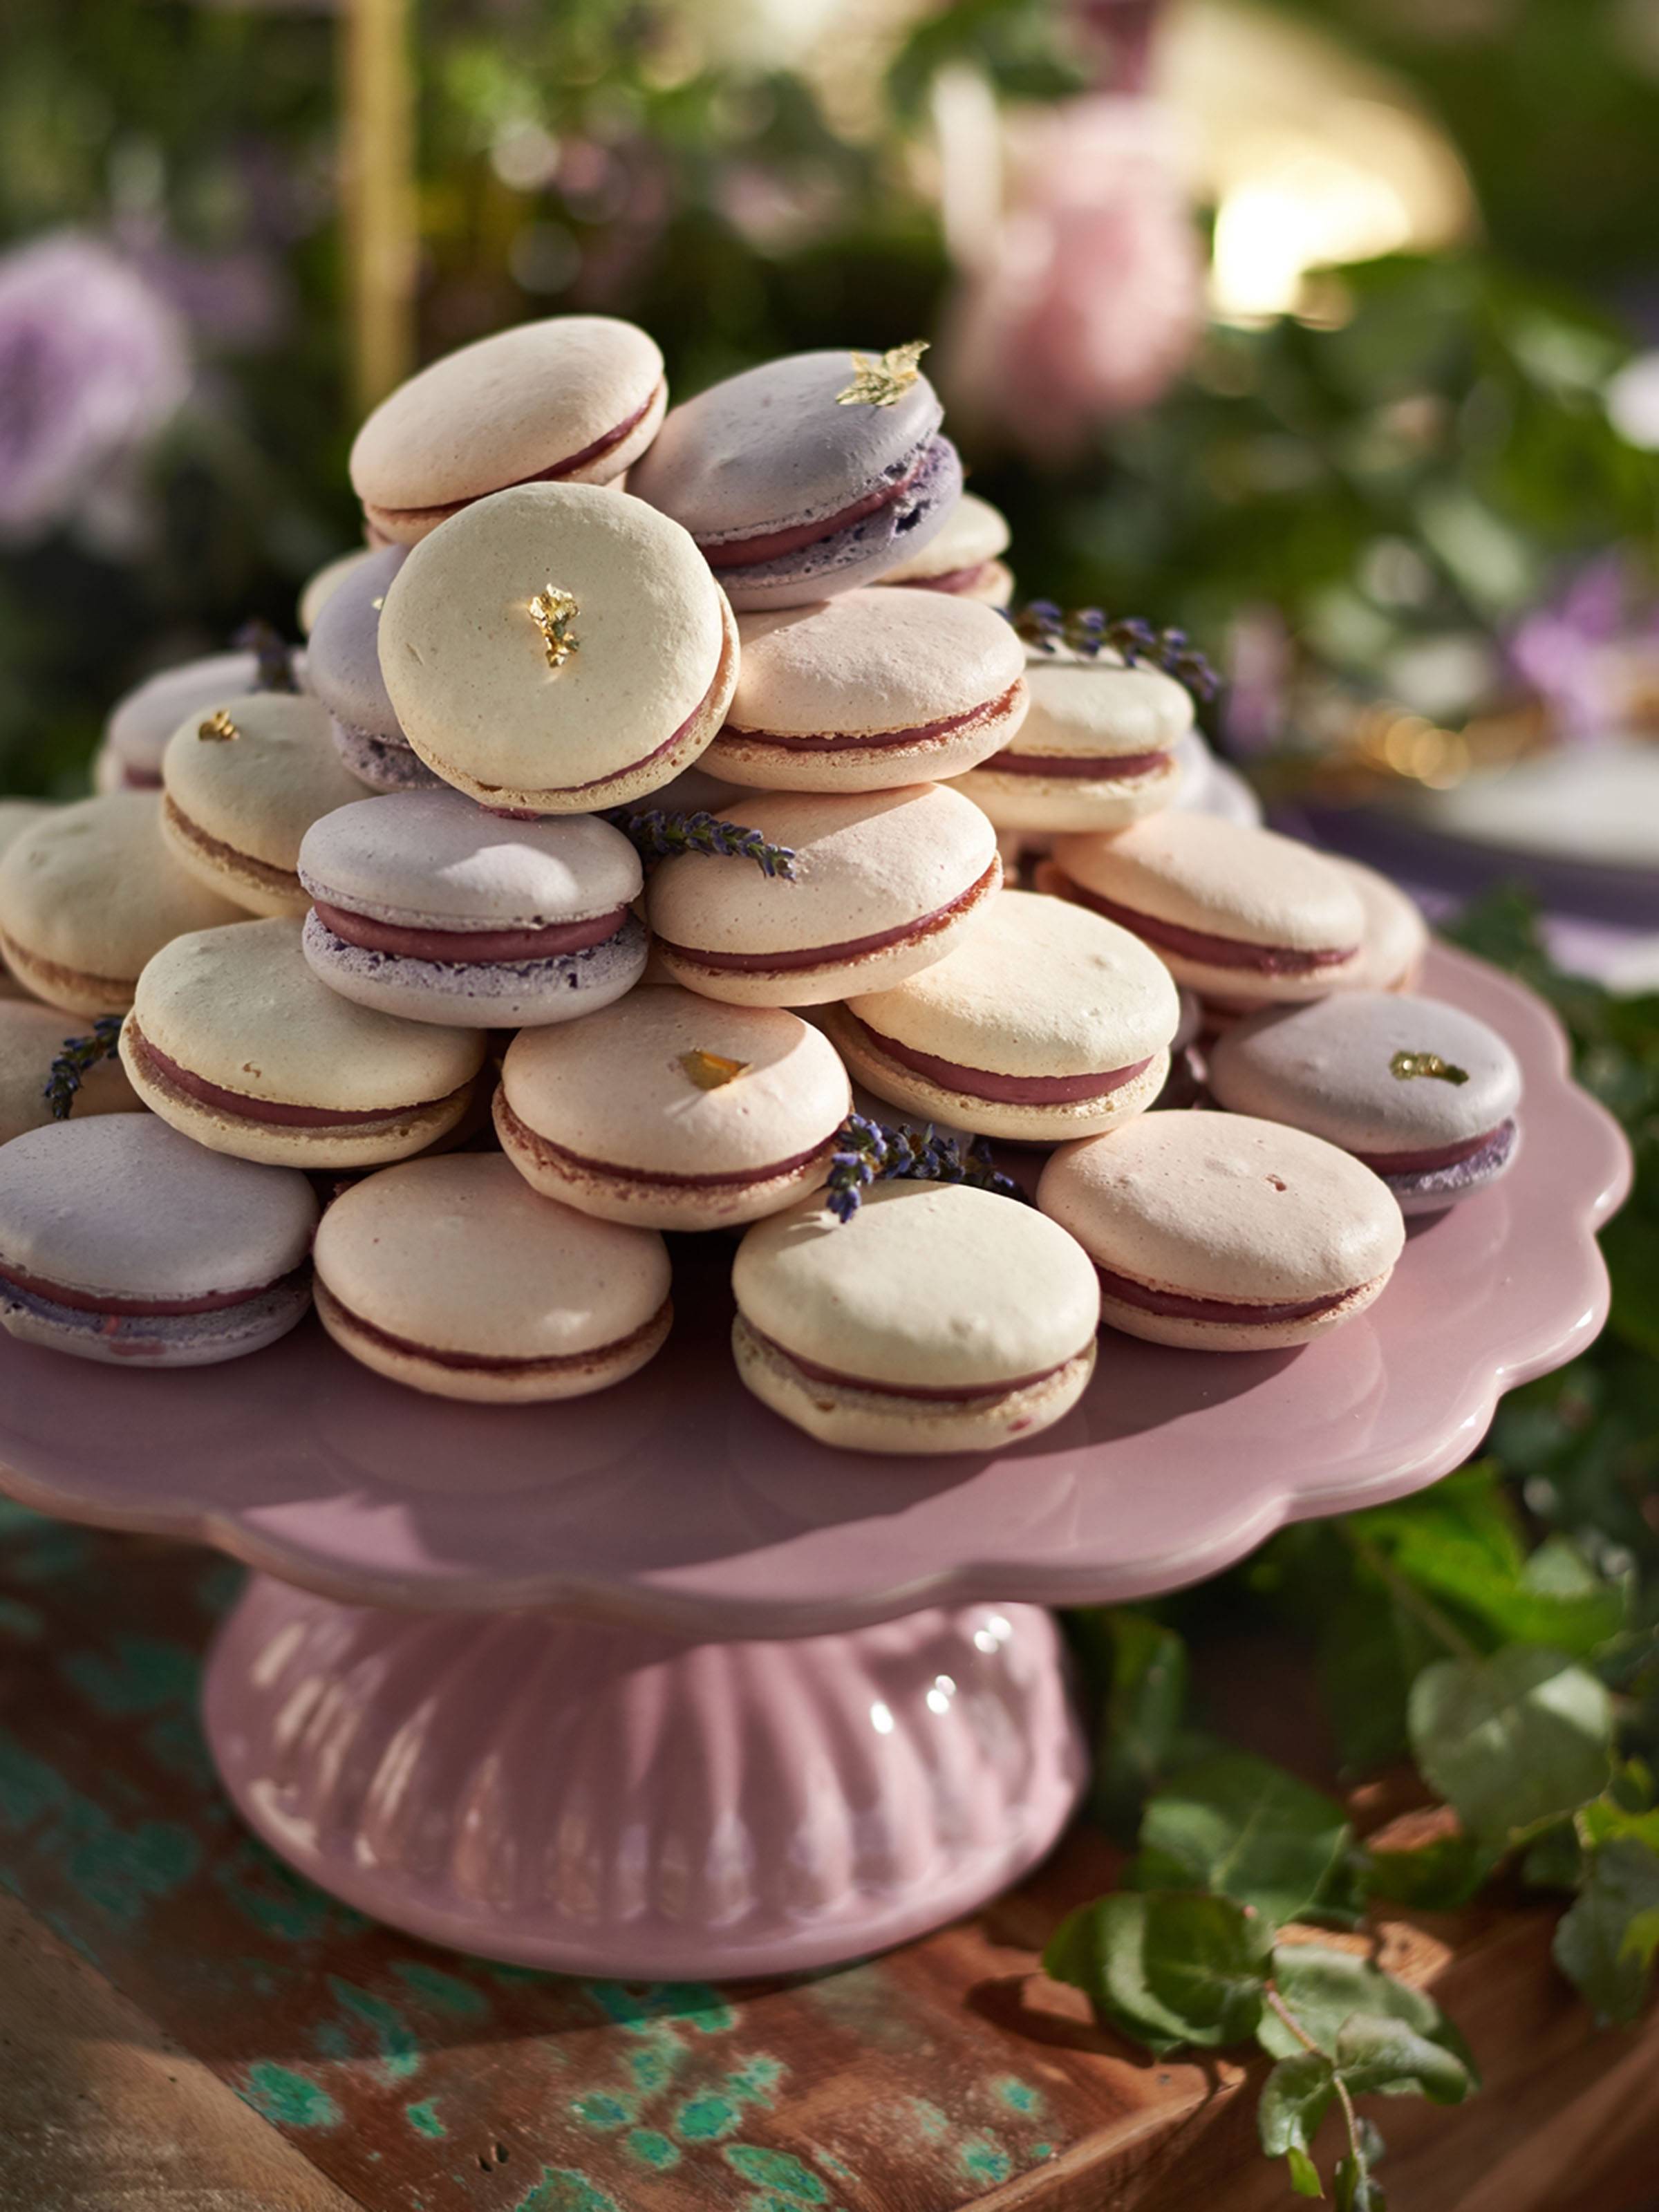 Ivory and lavender macarons on a mauve cake stand